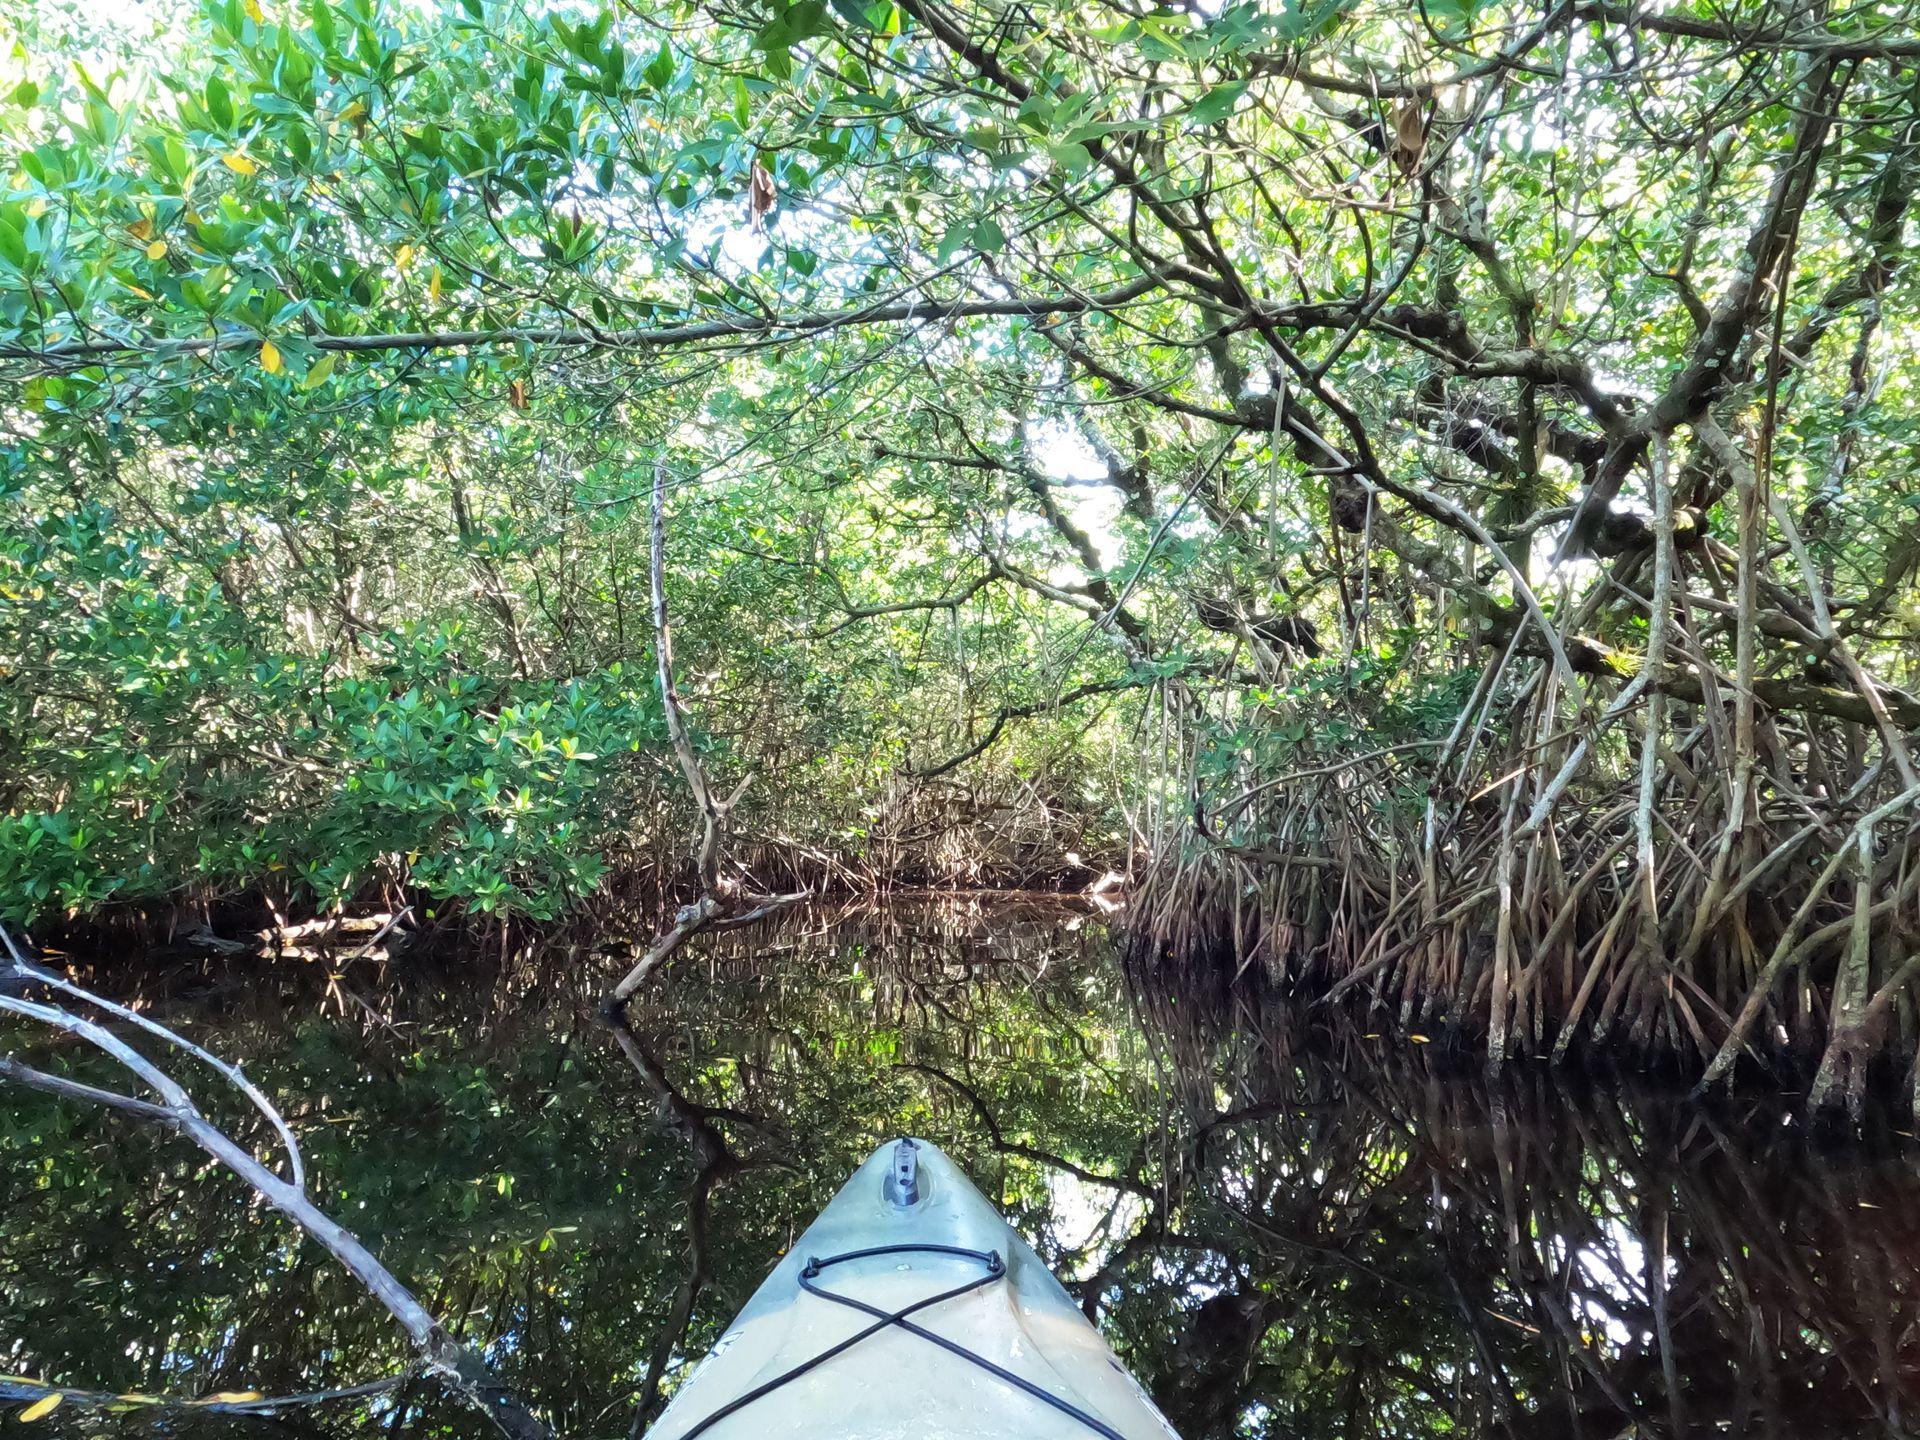 The front of a kayak surrounded by mangrove trees on either side of the water ahead